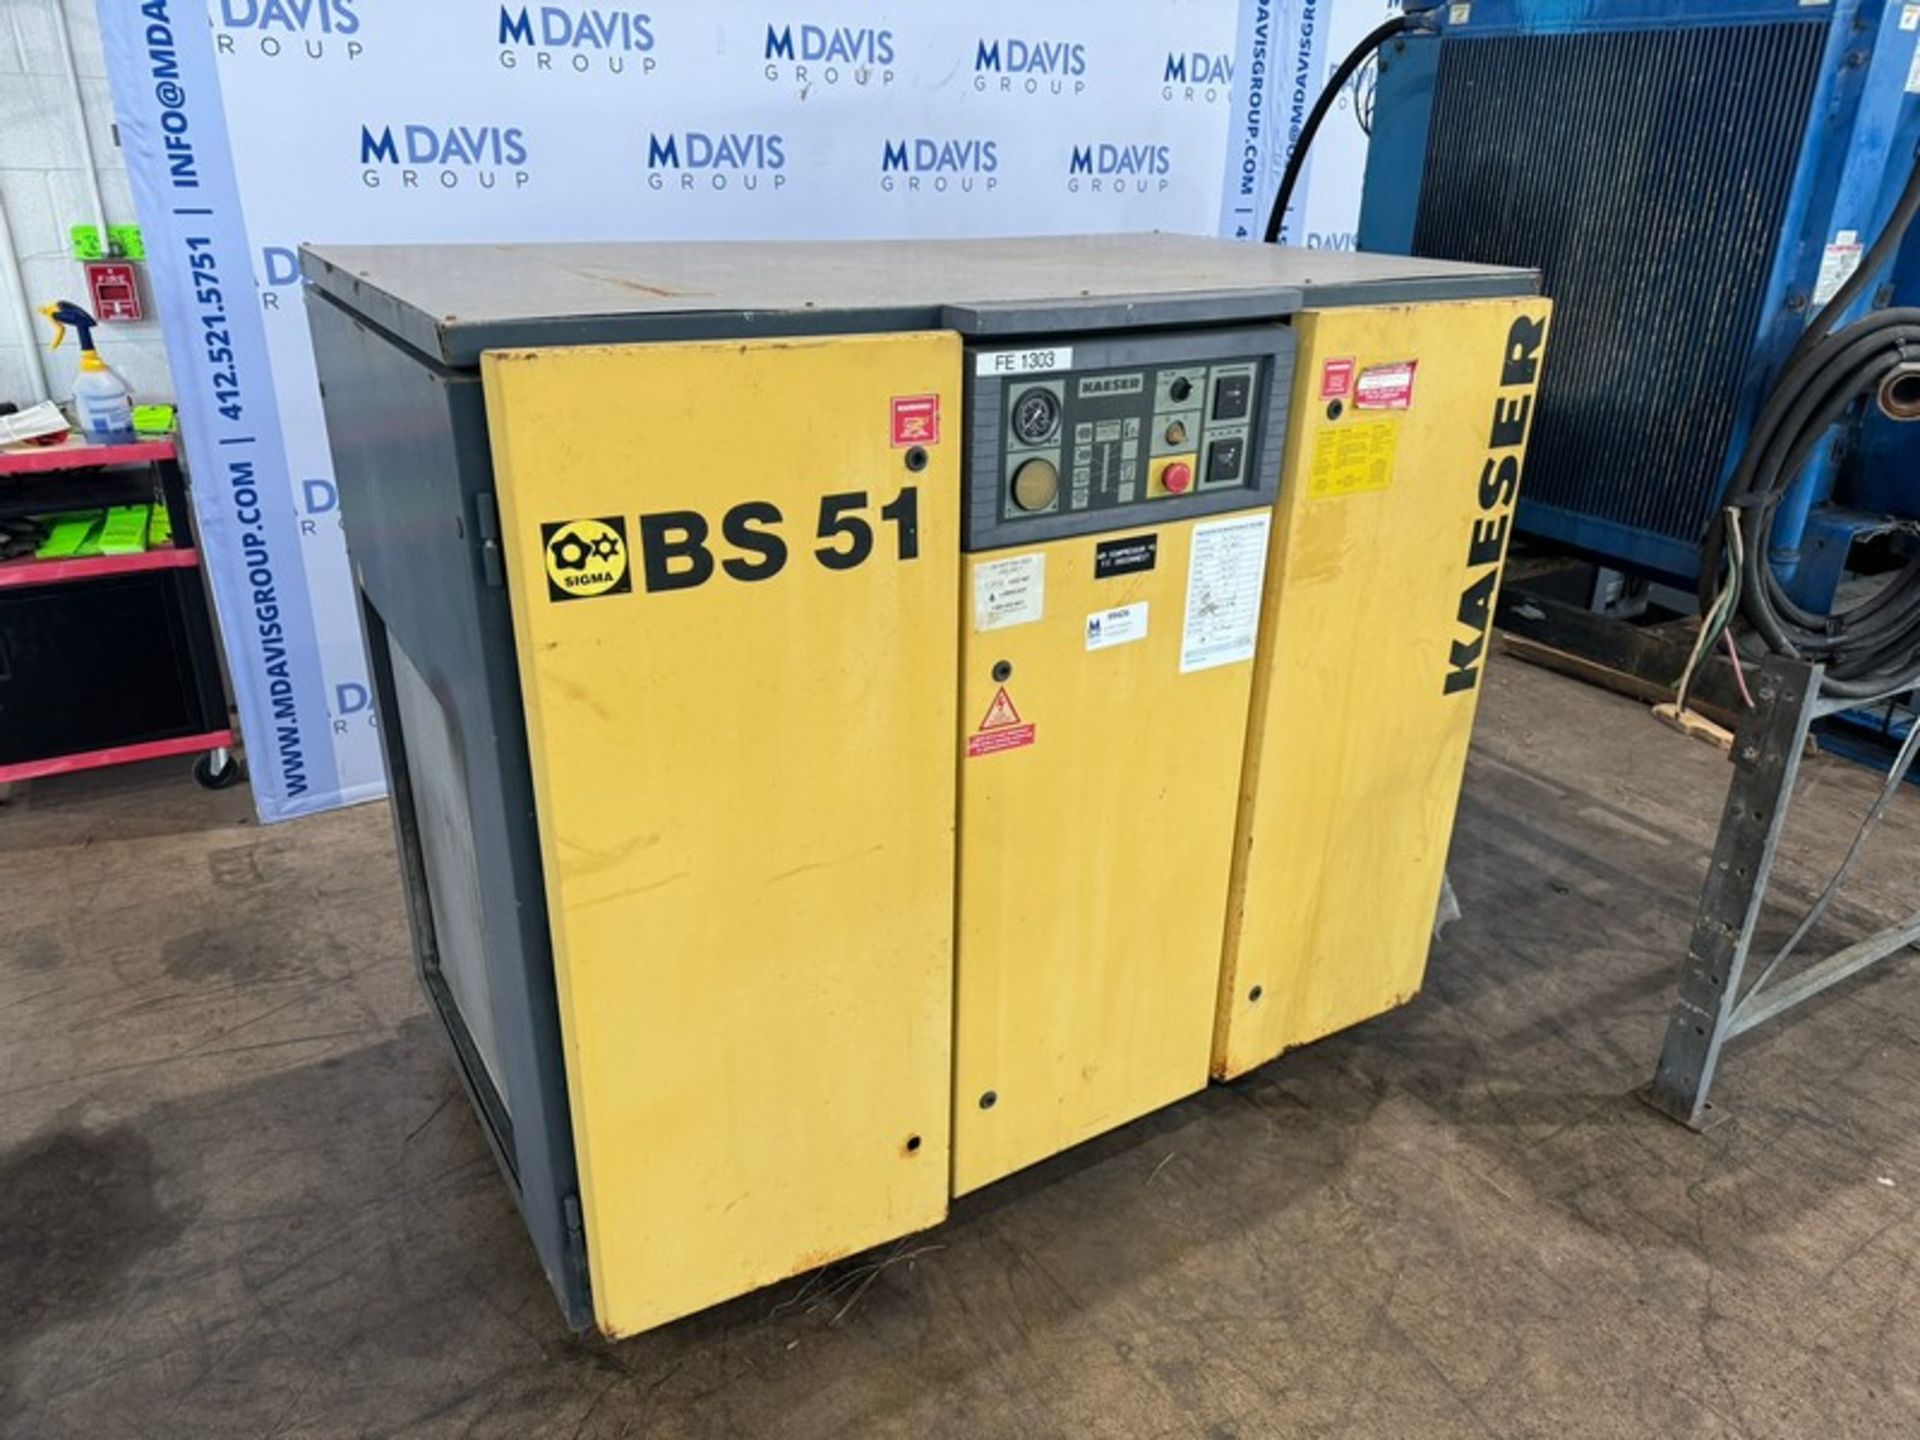 Kaeser Air Compressor,M/N BS 51 (INV#99426) (Located @ the MDG Auction Showroom 2.0 in - Image 2 of 8